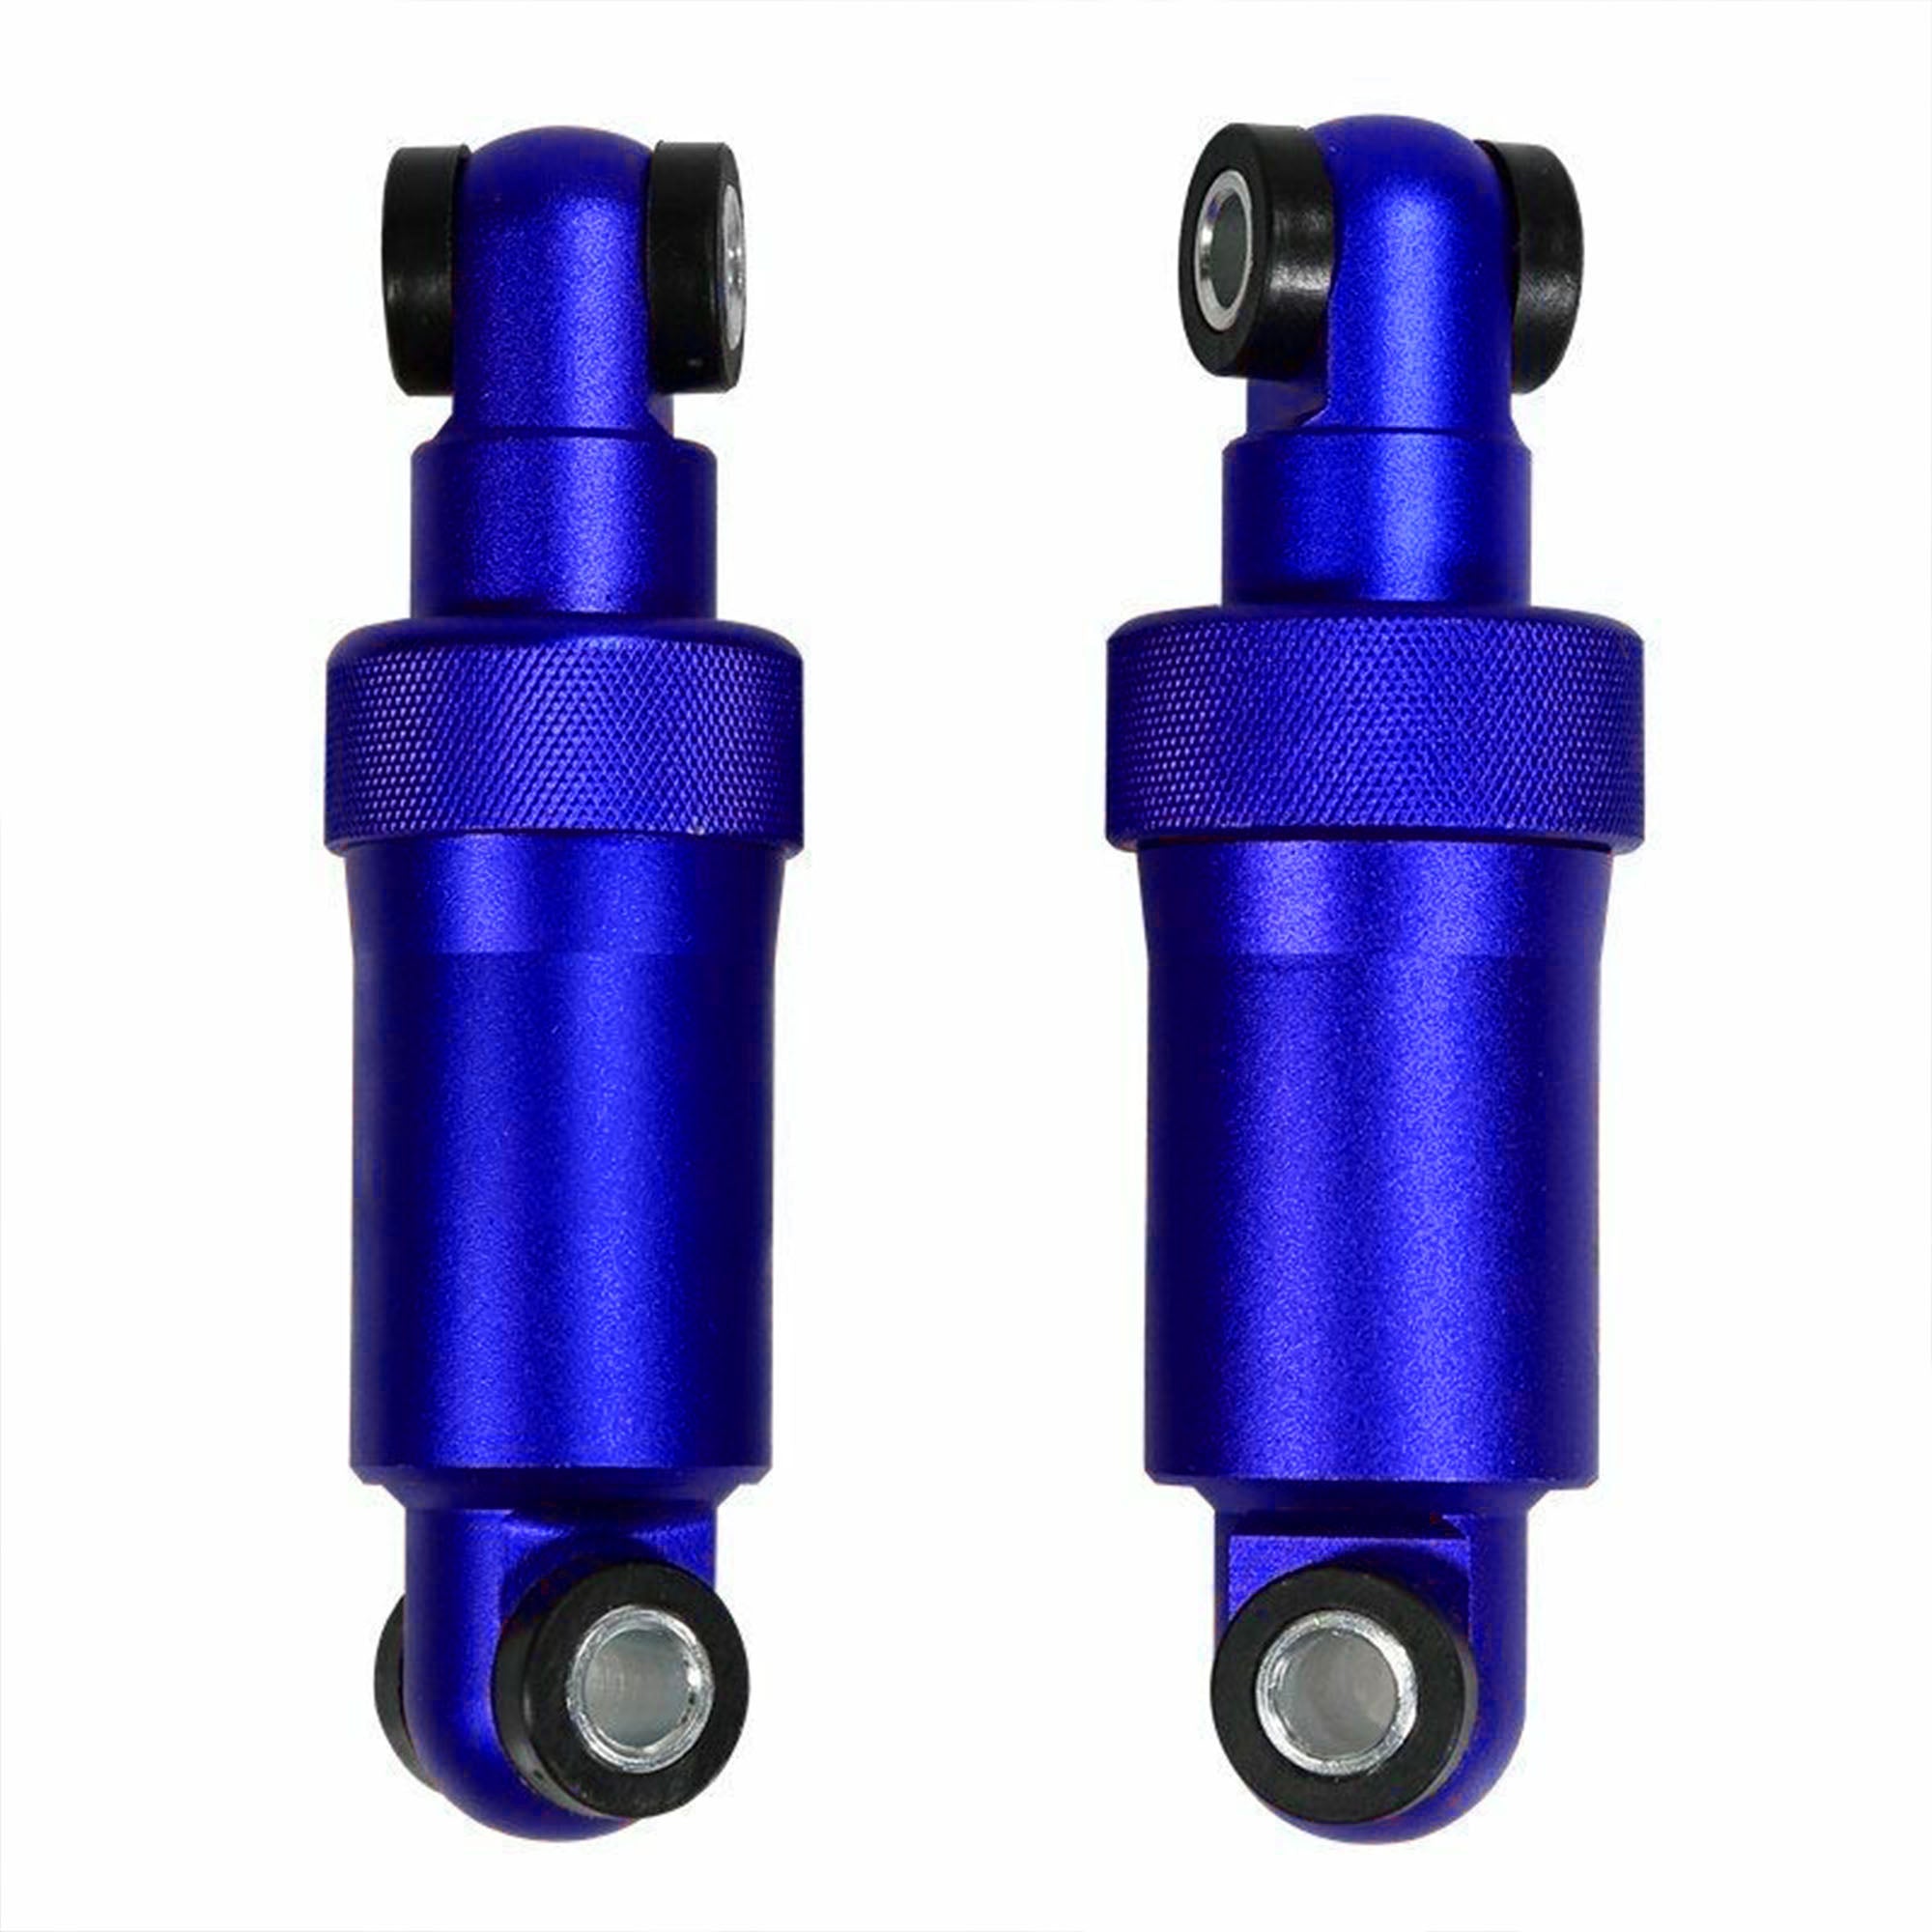 Aluminum Rear Suspension for e10 Electric Scooter